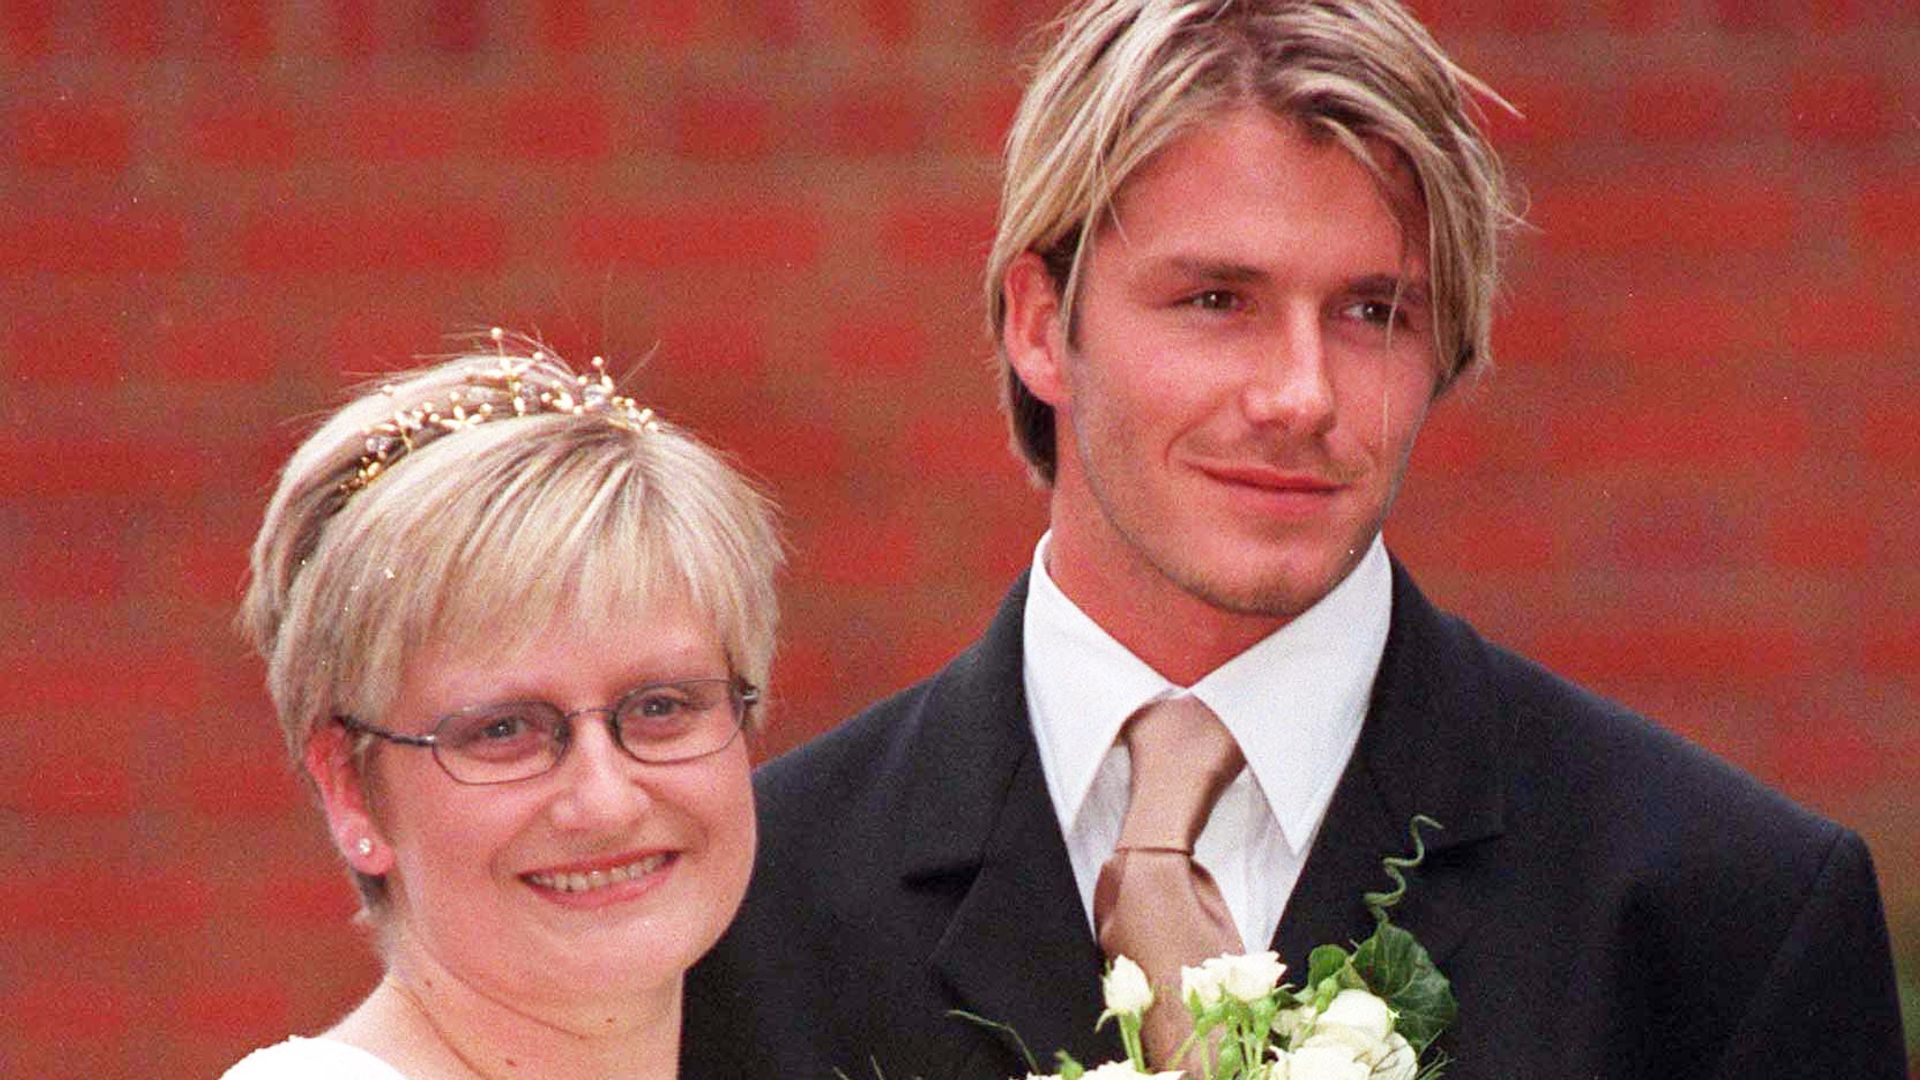 David Beckham in a suit with blonde hair smiling next to his sister Lynne on her wedding day